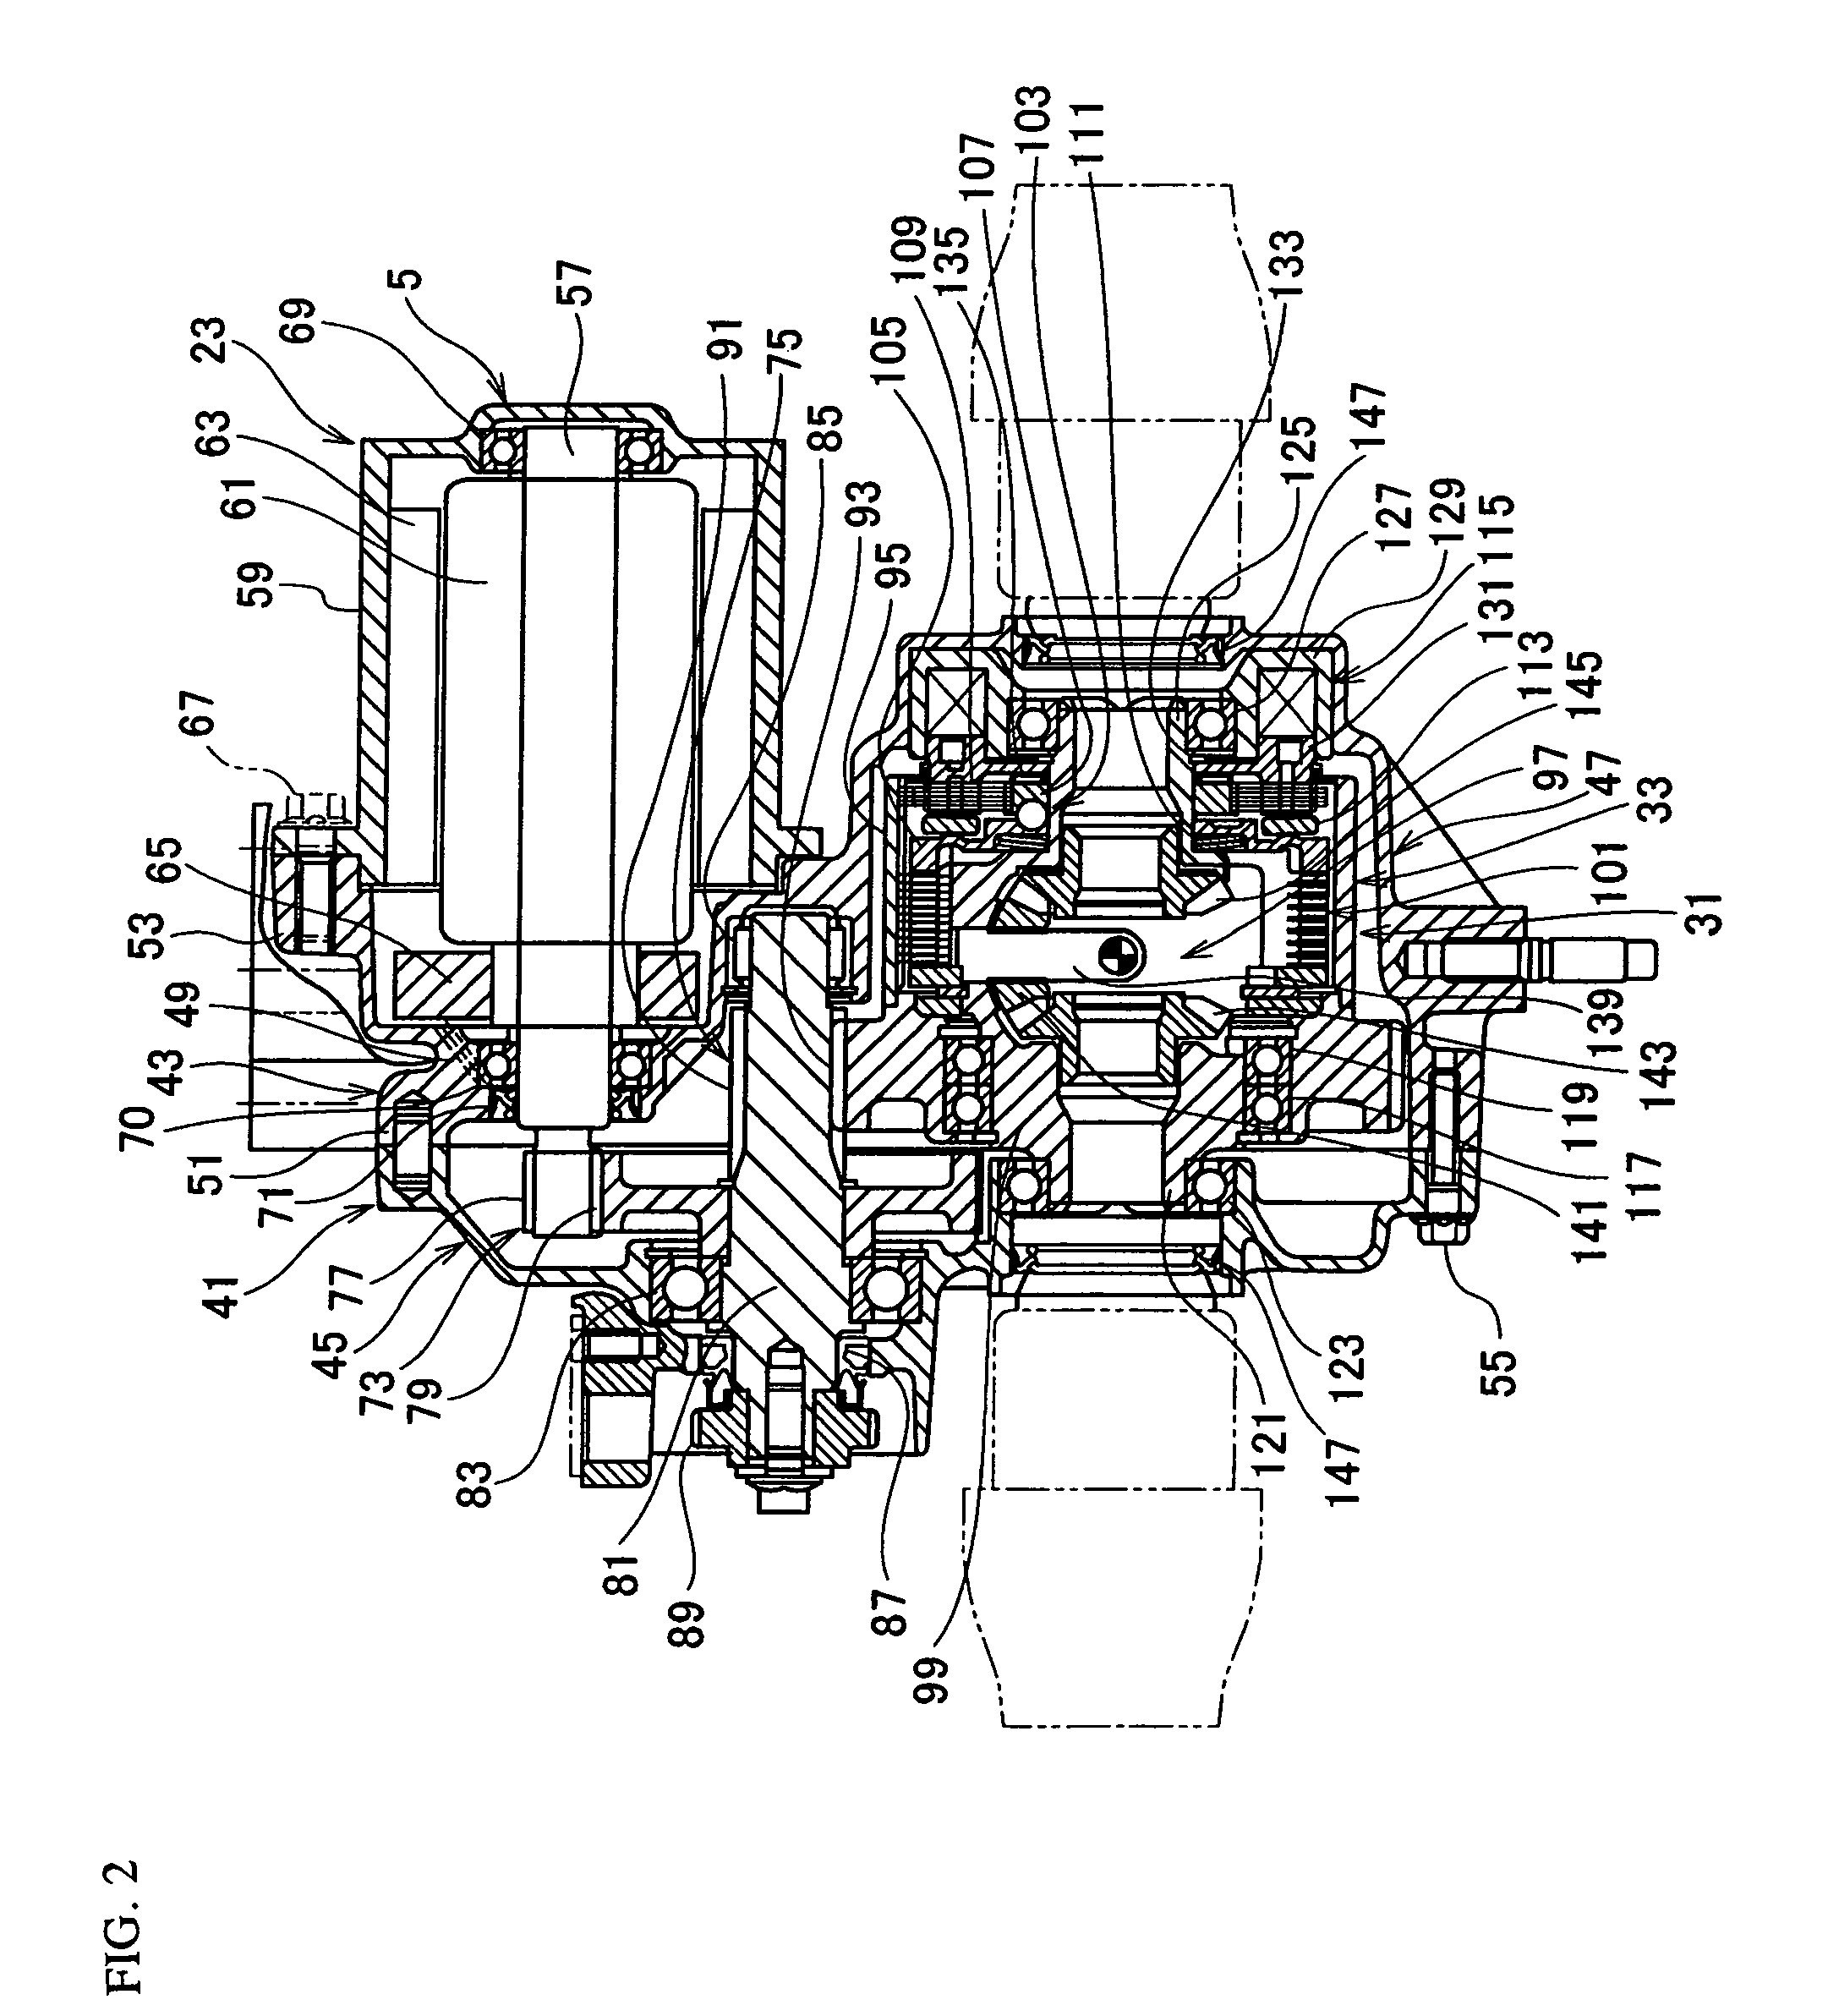 Reduction drive device